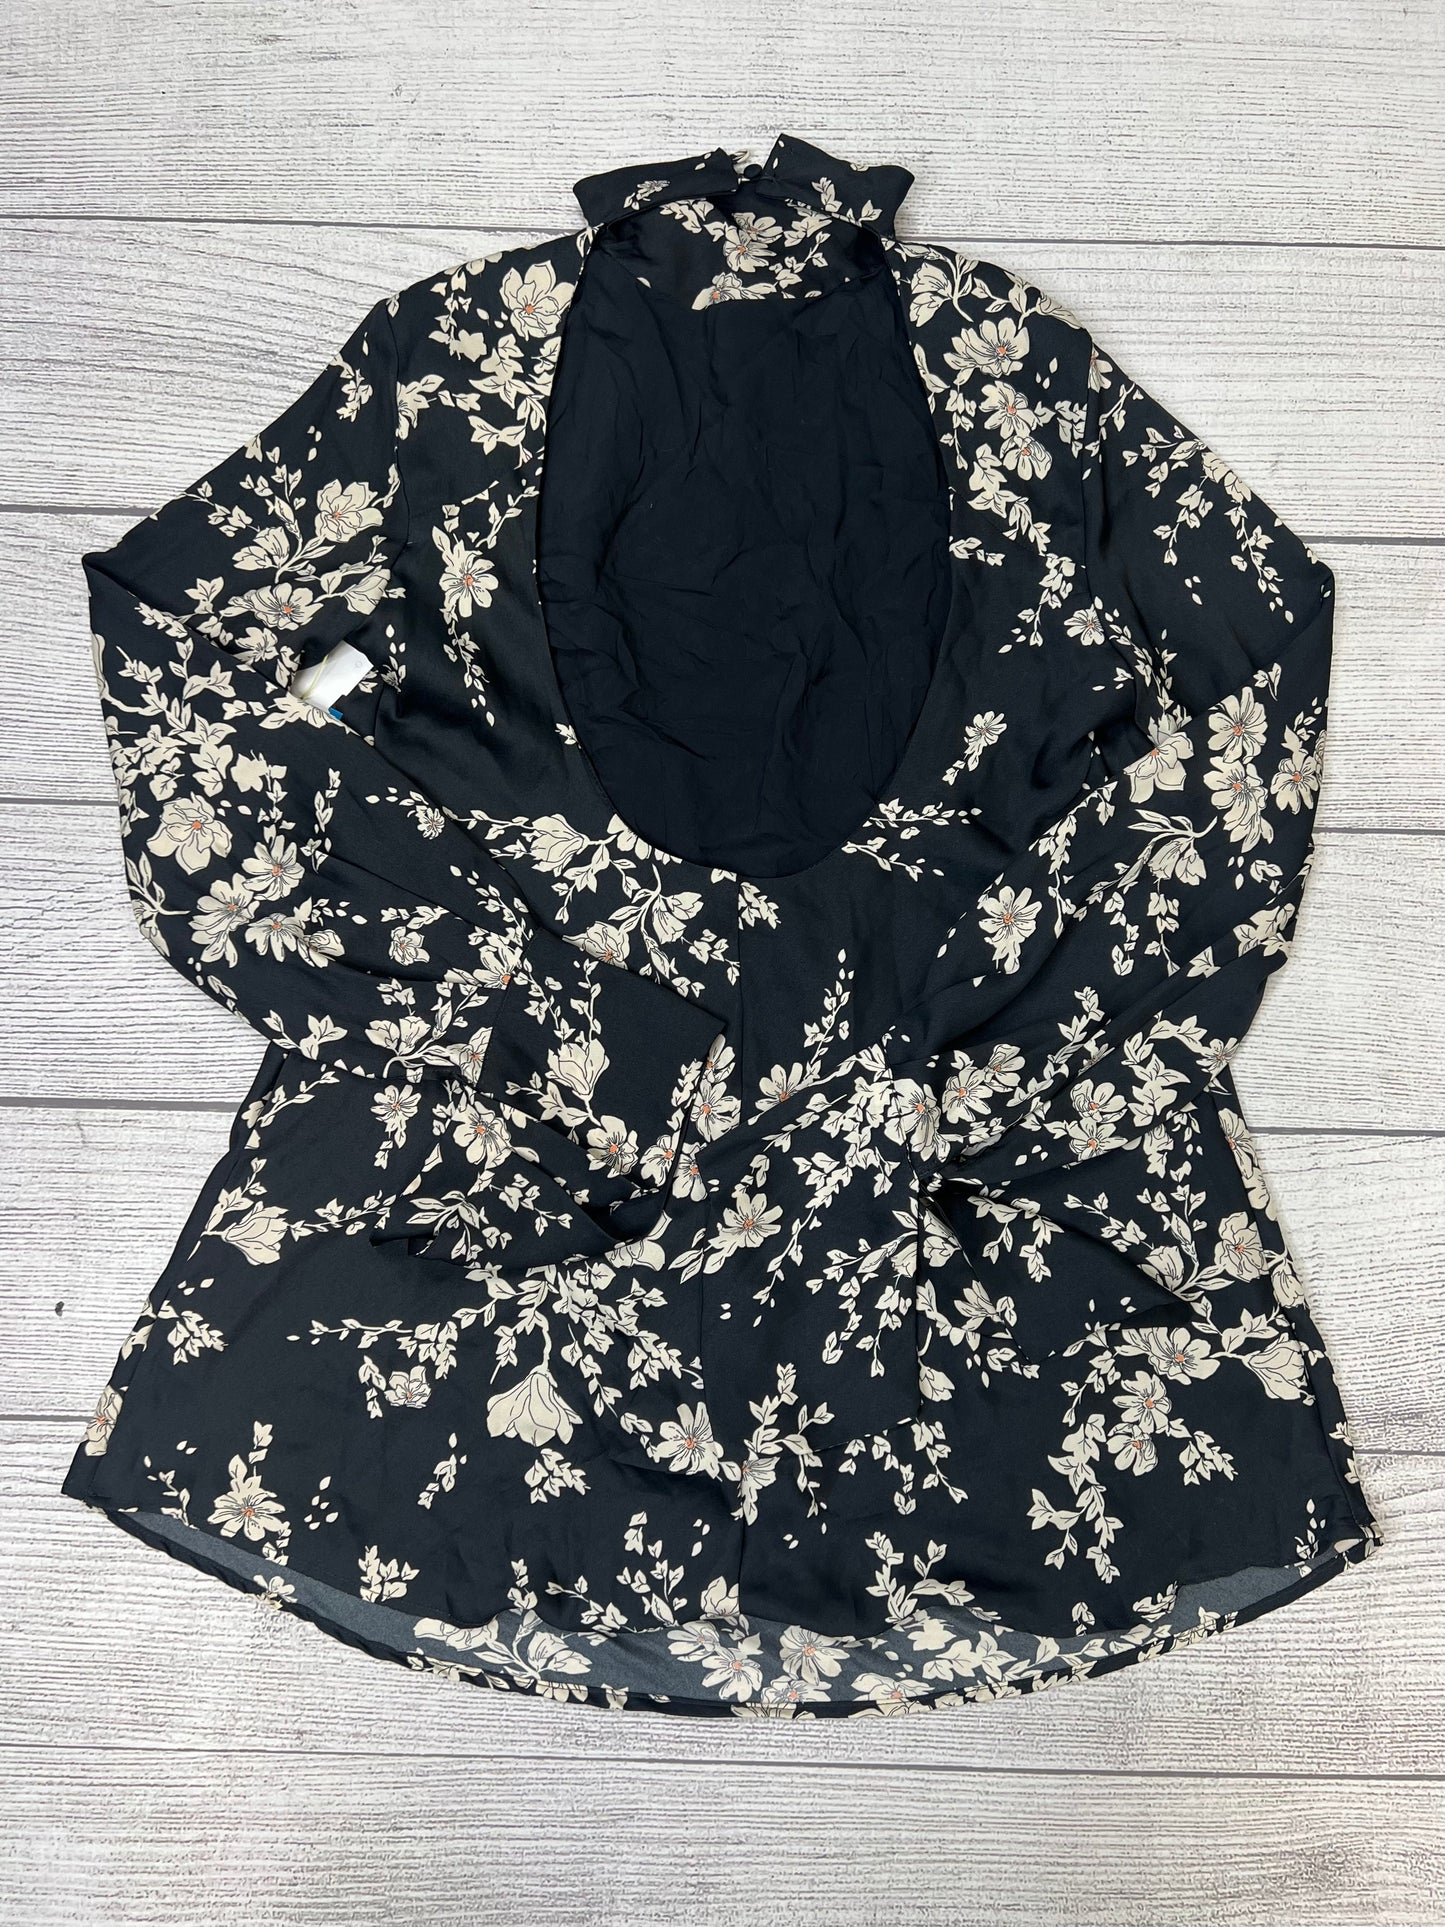 Floral Dress Casual Short Free People, Size M